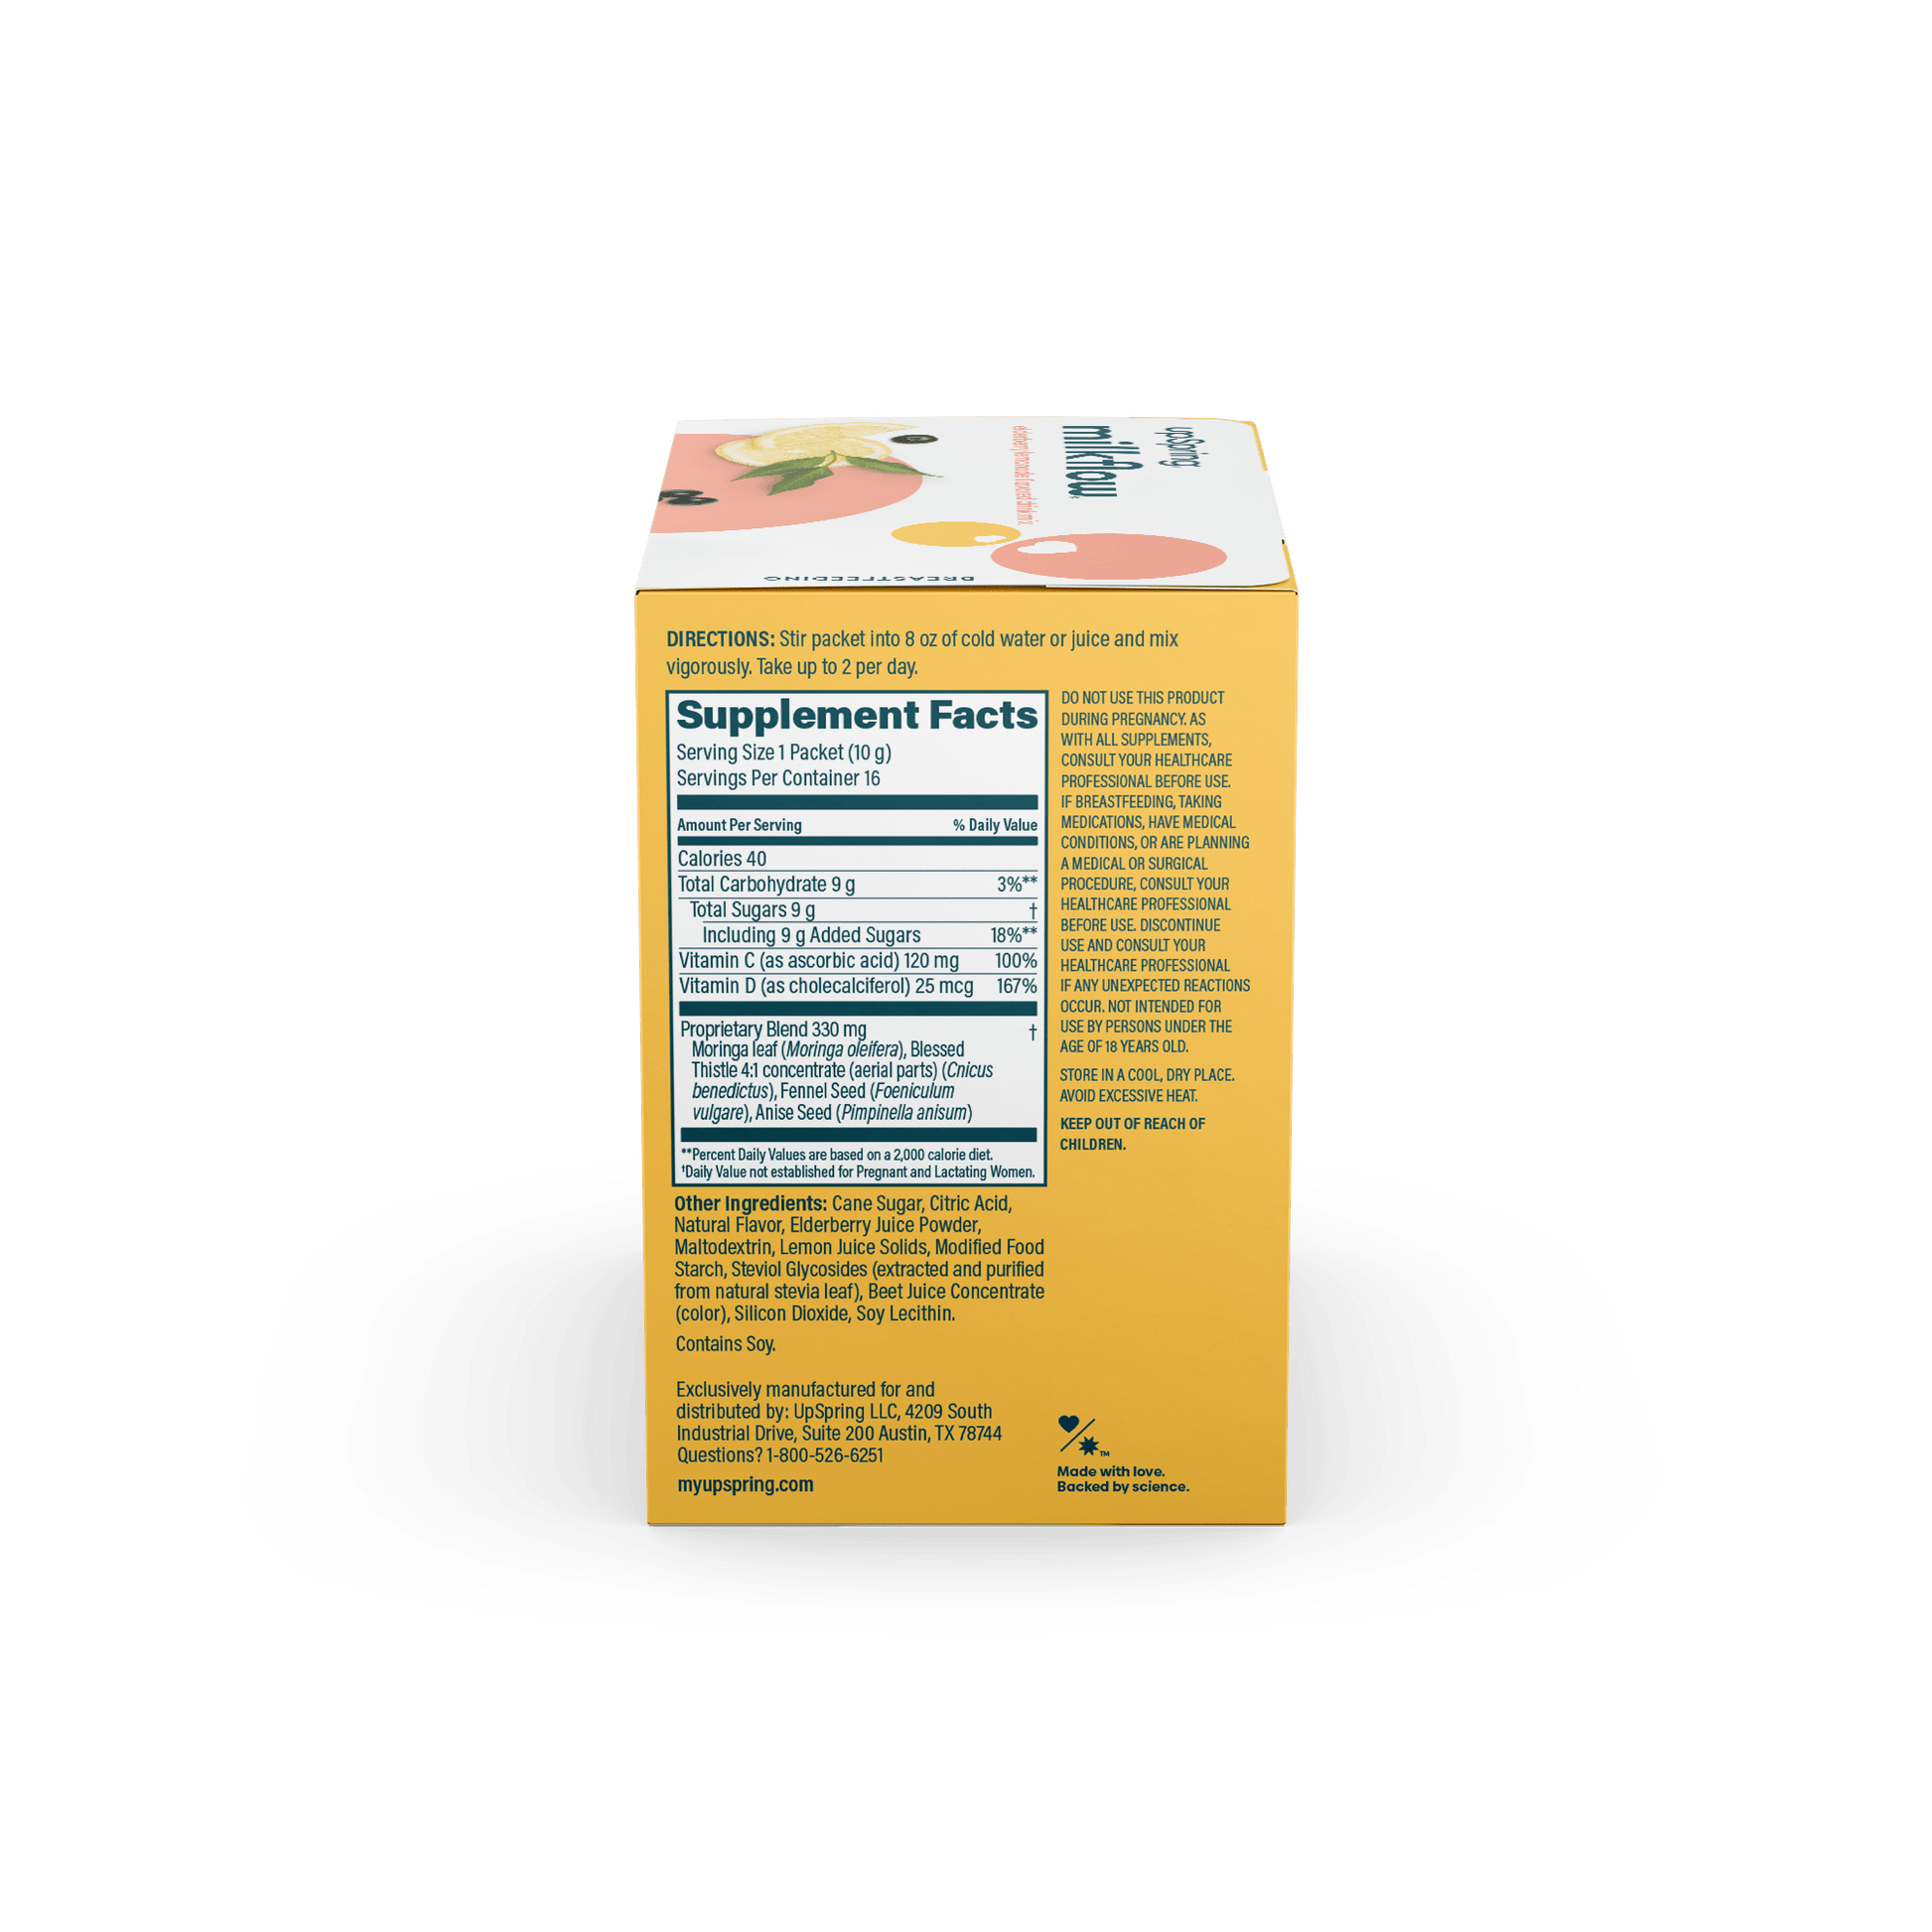 Supplement facts, ingredients, and warning label from the side of the box of Elderberry Lemonade MilkFlow